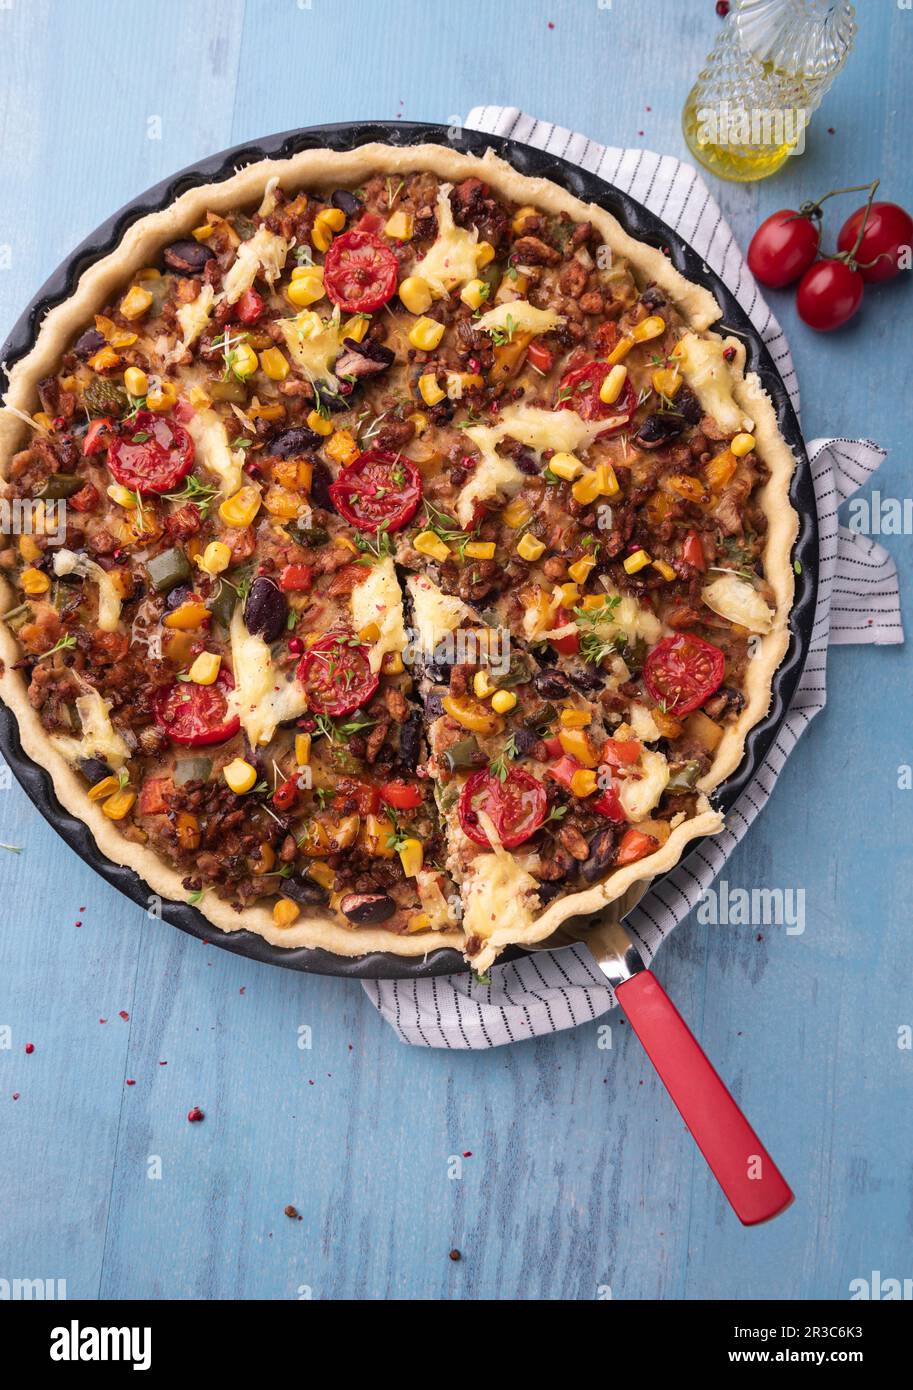 Vegan quiche 'Mexican Style' with soya mince, kidney beans and corn Stock Photo